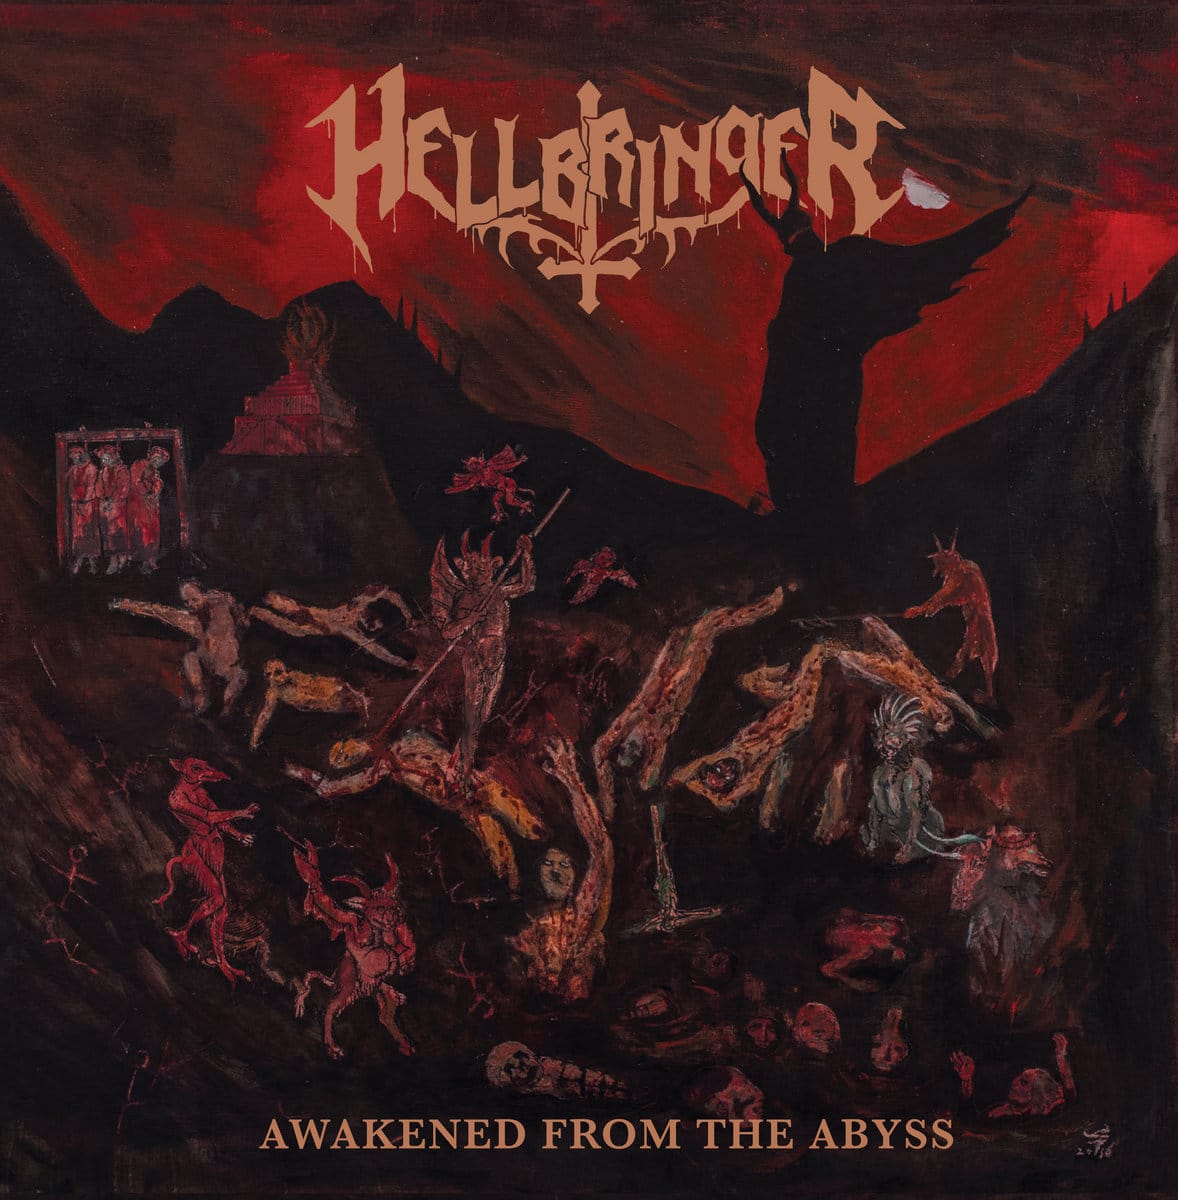 Cover art for Awakened From The Abyss by Hellbringer. Full record & mix: Infidel Studios